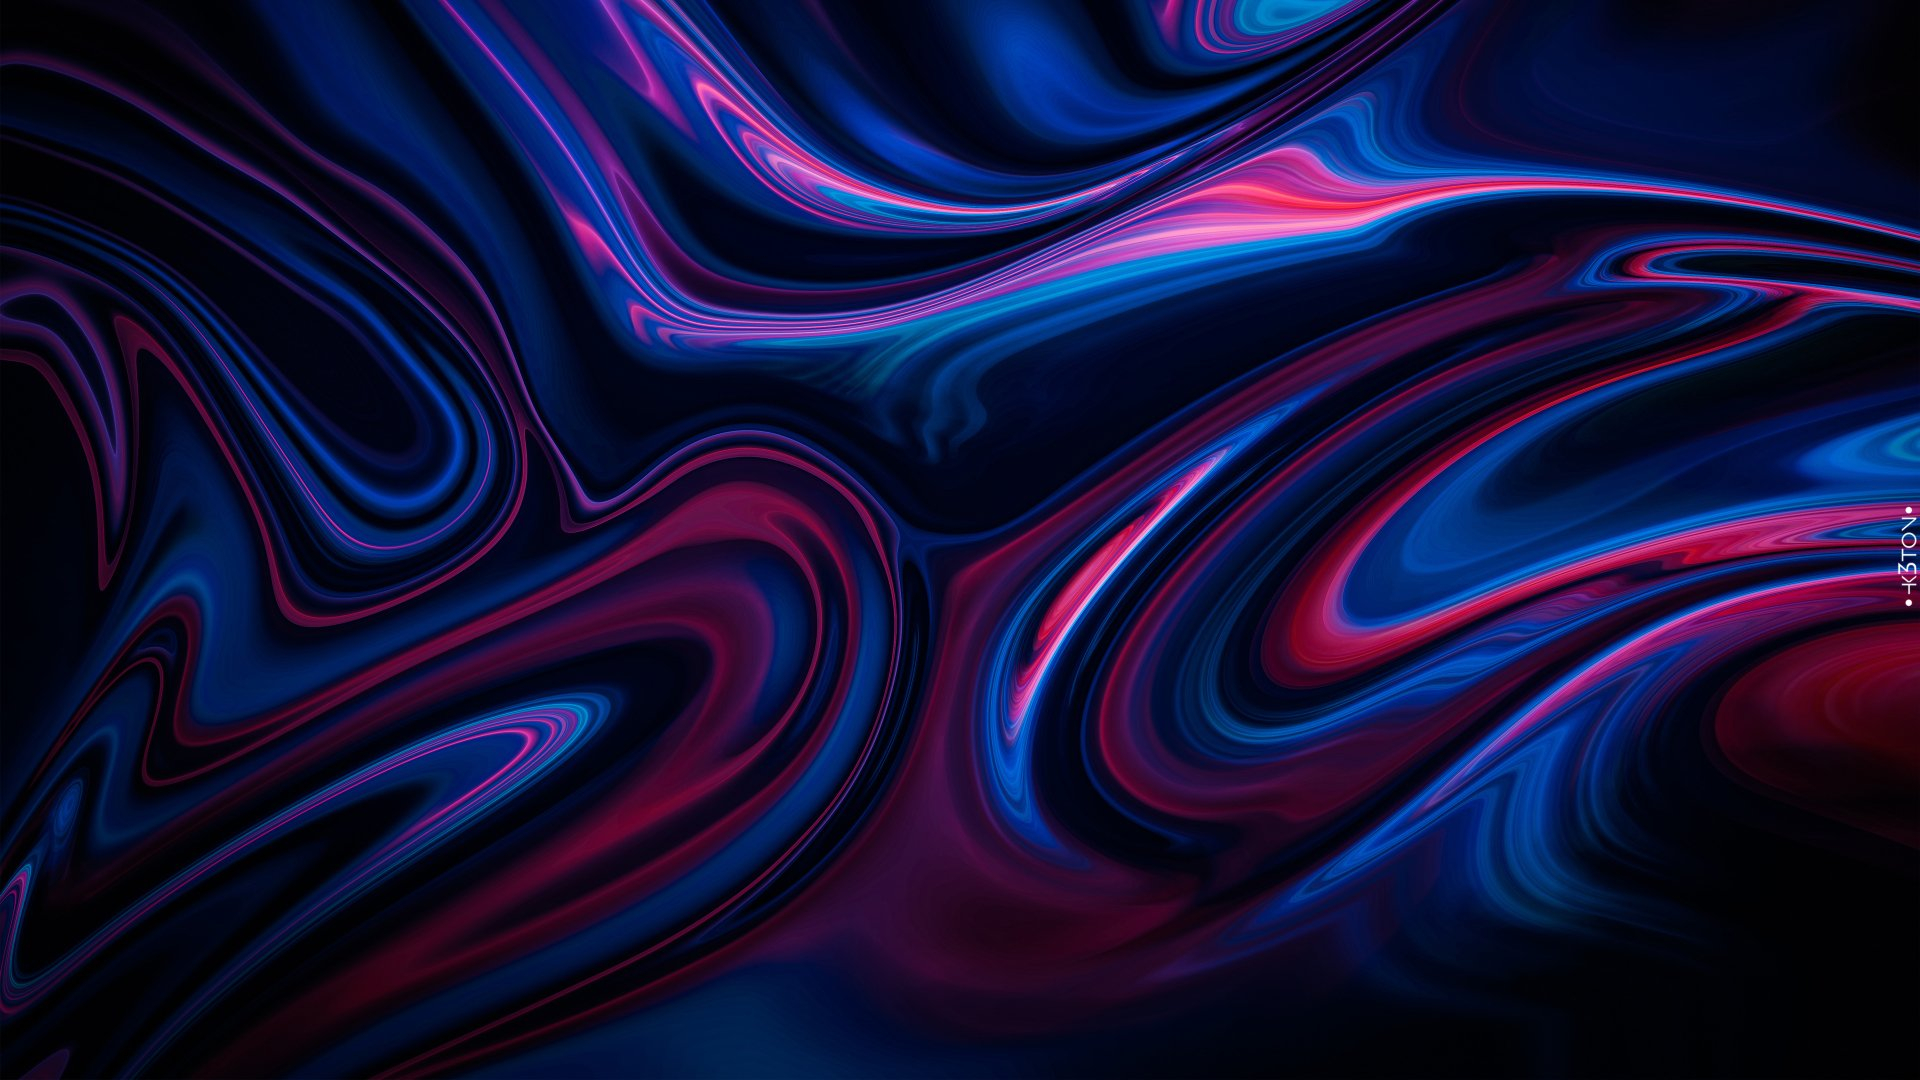 1920x1080 170+ Swirl HD Wallpapers and Backgrounds